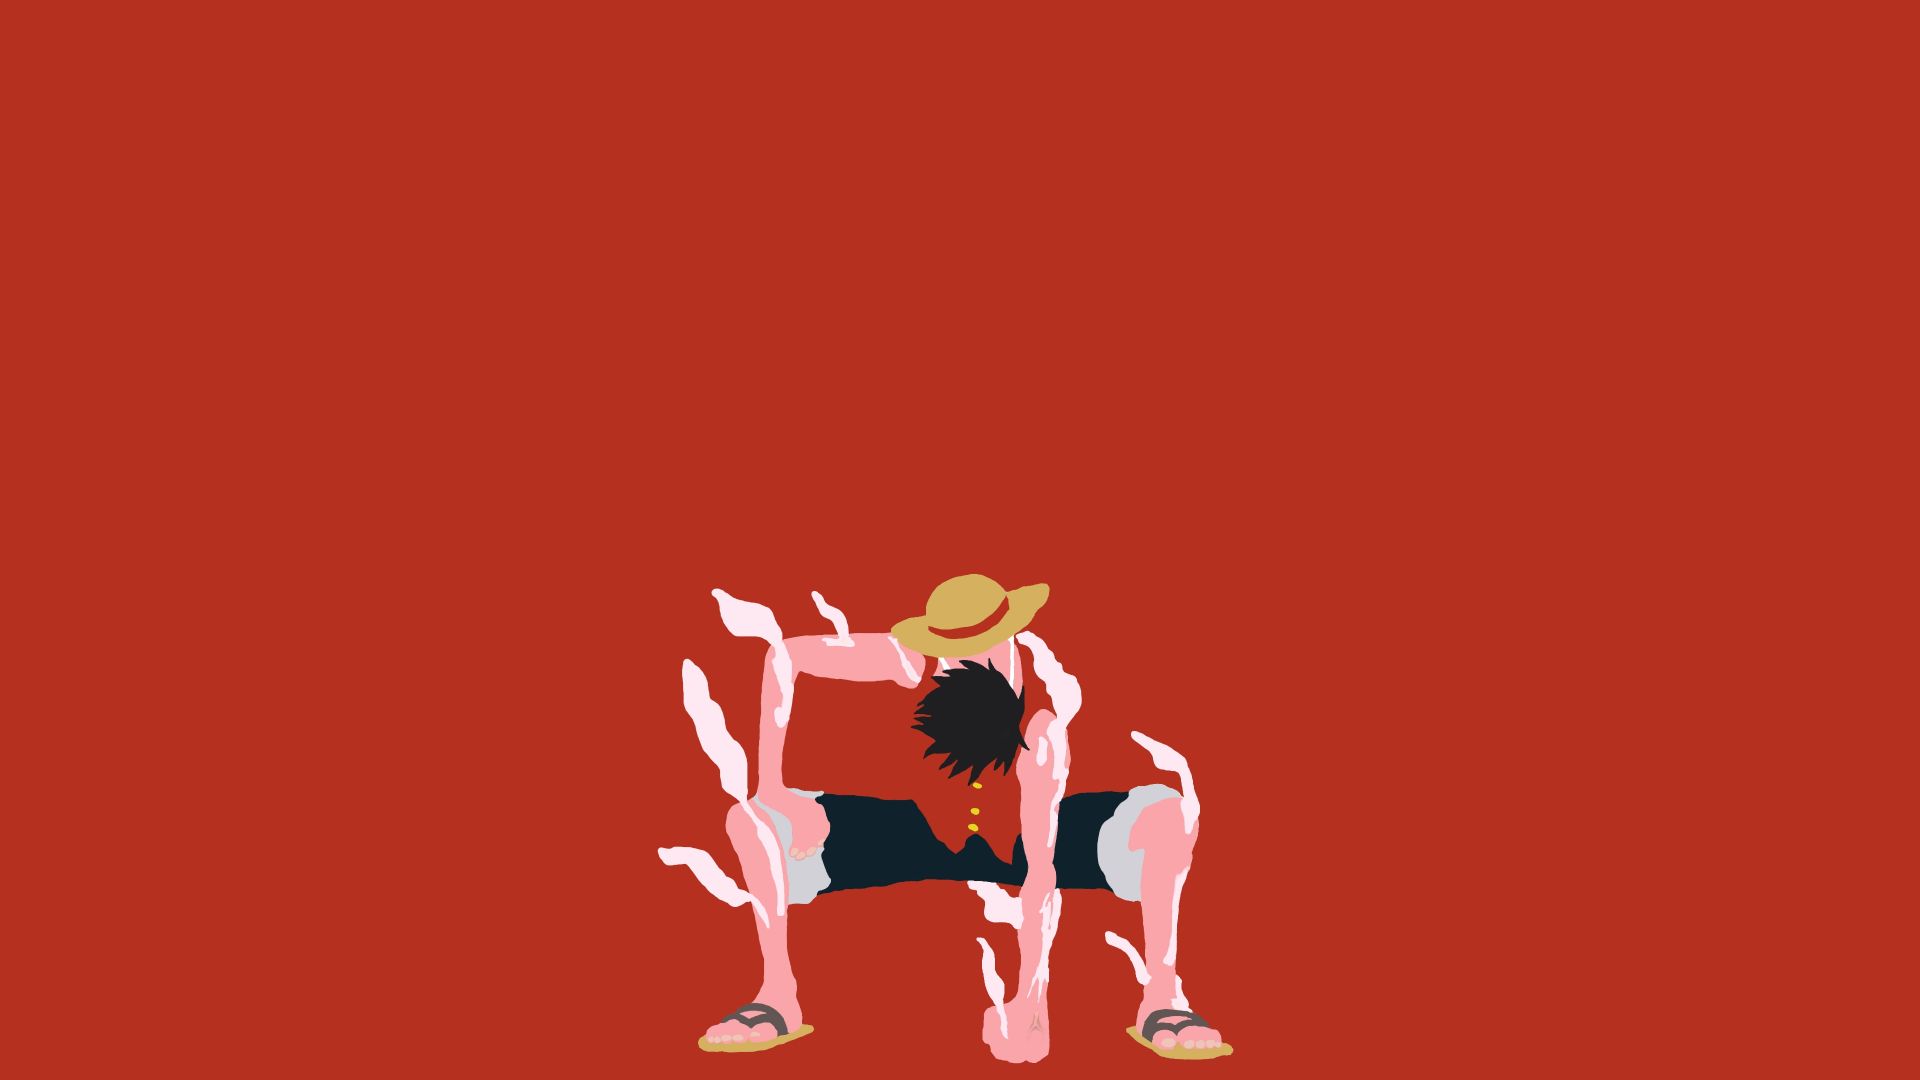 Monkey d. luffy, one piece, anime, minimal, anime boy wallpaper, HD image, picture, background, d44ab4